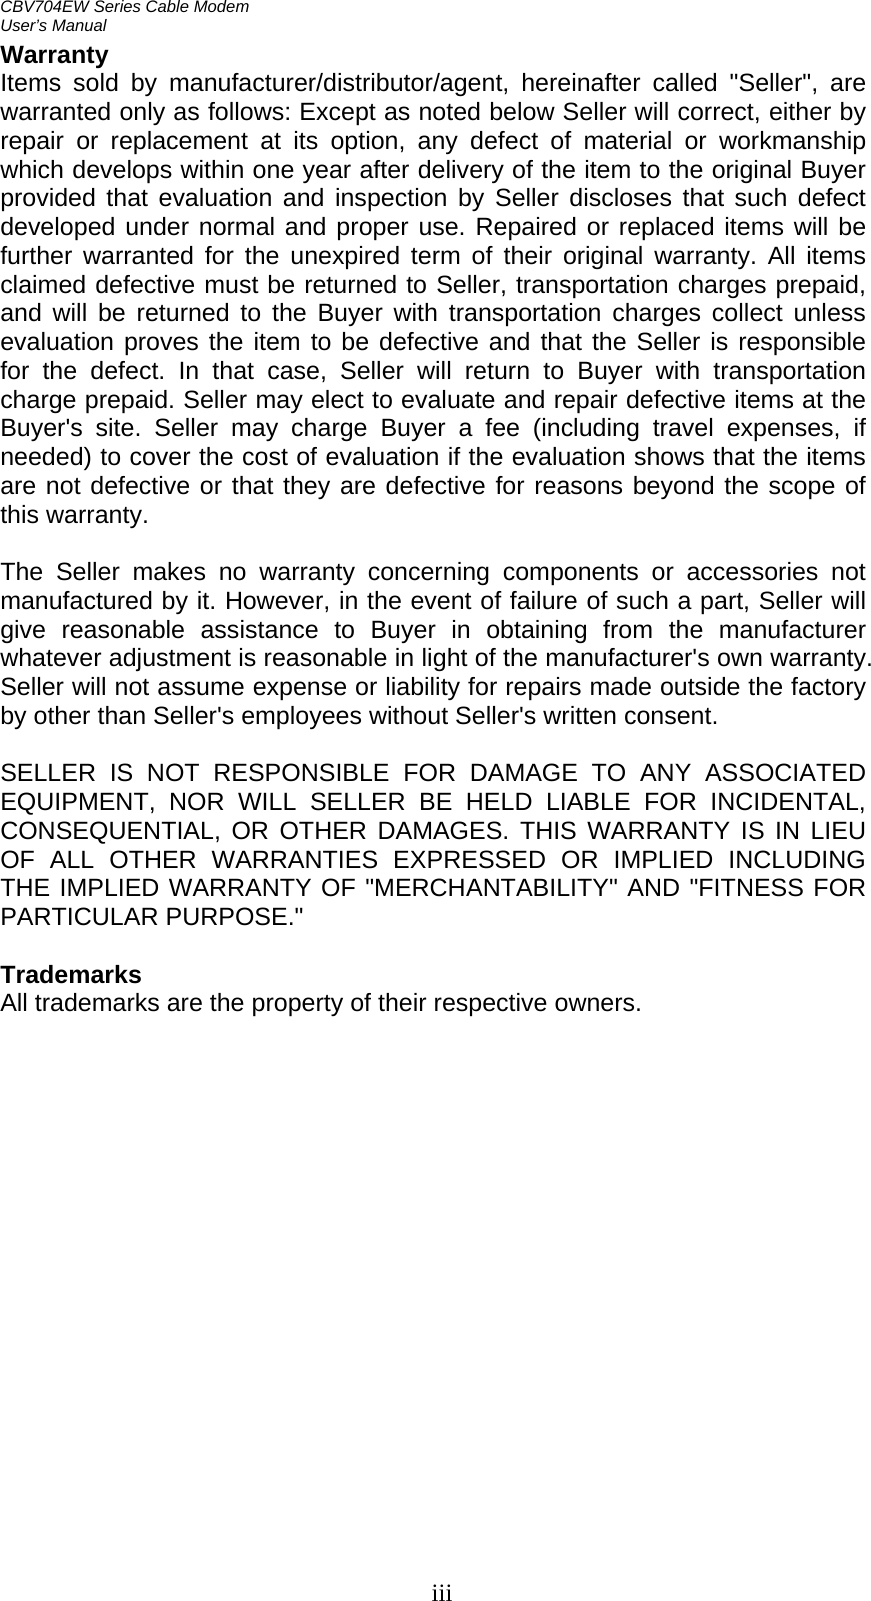 CBV704EW Series Cable Modem  User’s Manual   iiiWarranty  Items sold by manufacturer/distributor/agent, hereinafter called &quot;Seller&quot;, are warranted only as follows: Except as noted below Seller will correct, either by repair or replacement at its option, any defect of material or workmanship which develops within one year after delivery of the item to the original Buyer provided that evaluation and inspection by Seller discloses that such defect developed under normal and proper use. Repaired or replaced items will be further warranted for the unexpired term of their original warranty. All items claimed defective must be returned to Seller, transportation charges prepaid, and will be returned to the Buyer with transportation charges collect unless evaluation proves the item to be defective and that the Seller is responsible for the defect. In that case, Seller will return to Buyer with transportation charge prepaid. Seller may elect to evaluate and repair defective items at the Buyer&apos;s site. Seller may charge Buyer a fee (including travel expenses, if needed) to cover the cost of evaluation if the evaluation shows that the items are not defective or that they are defective for reasons beyond the scope of this warranty.  The Seller makes no warranty concerning components or accessories not manufactured by it. However, in the event of failure of such a part, Seller will give reasonable assistance to Buyer in obtaining from the manufacturer whatever adjustment is reasonable in light of the manufacturer&apos;s own warranty. Seller will not assume expense or liability for repairs made outside the factory by other than Seller&apos;s employees without Seller&apos;s written consent.  SELLER IS NOT RESPONSIBLE FOR DAMAGE TO ANY ASSOCIATED EQUIPMENT, NOR WILL SELLER BE HELD LIABLE FOR INCIDENTAL, CONSEQUENTIAL, OR OTHER DAMAGES. THIS WARRANTY IS IN LIEU OF ALL OTHER WARRANTIES EXPRESSED OR IMPLIED INCLUDING THE IMPLIED WARRANTY OF &quot;MERCHANTABILITY&quot; AND &quot;FITNESS FOR PARTICULAR PURPOSE.&quot;  Trademarks All trademarks are the property of their respective owners.  